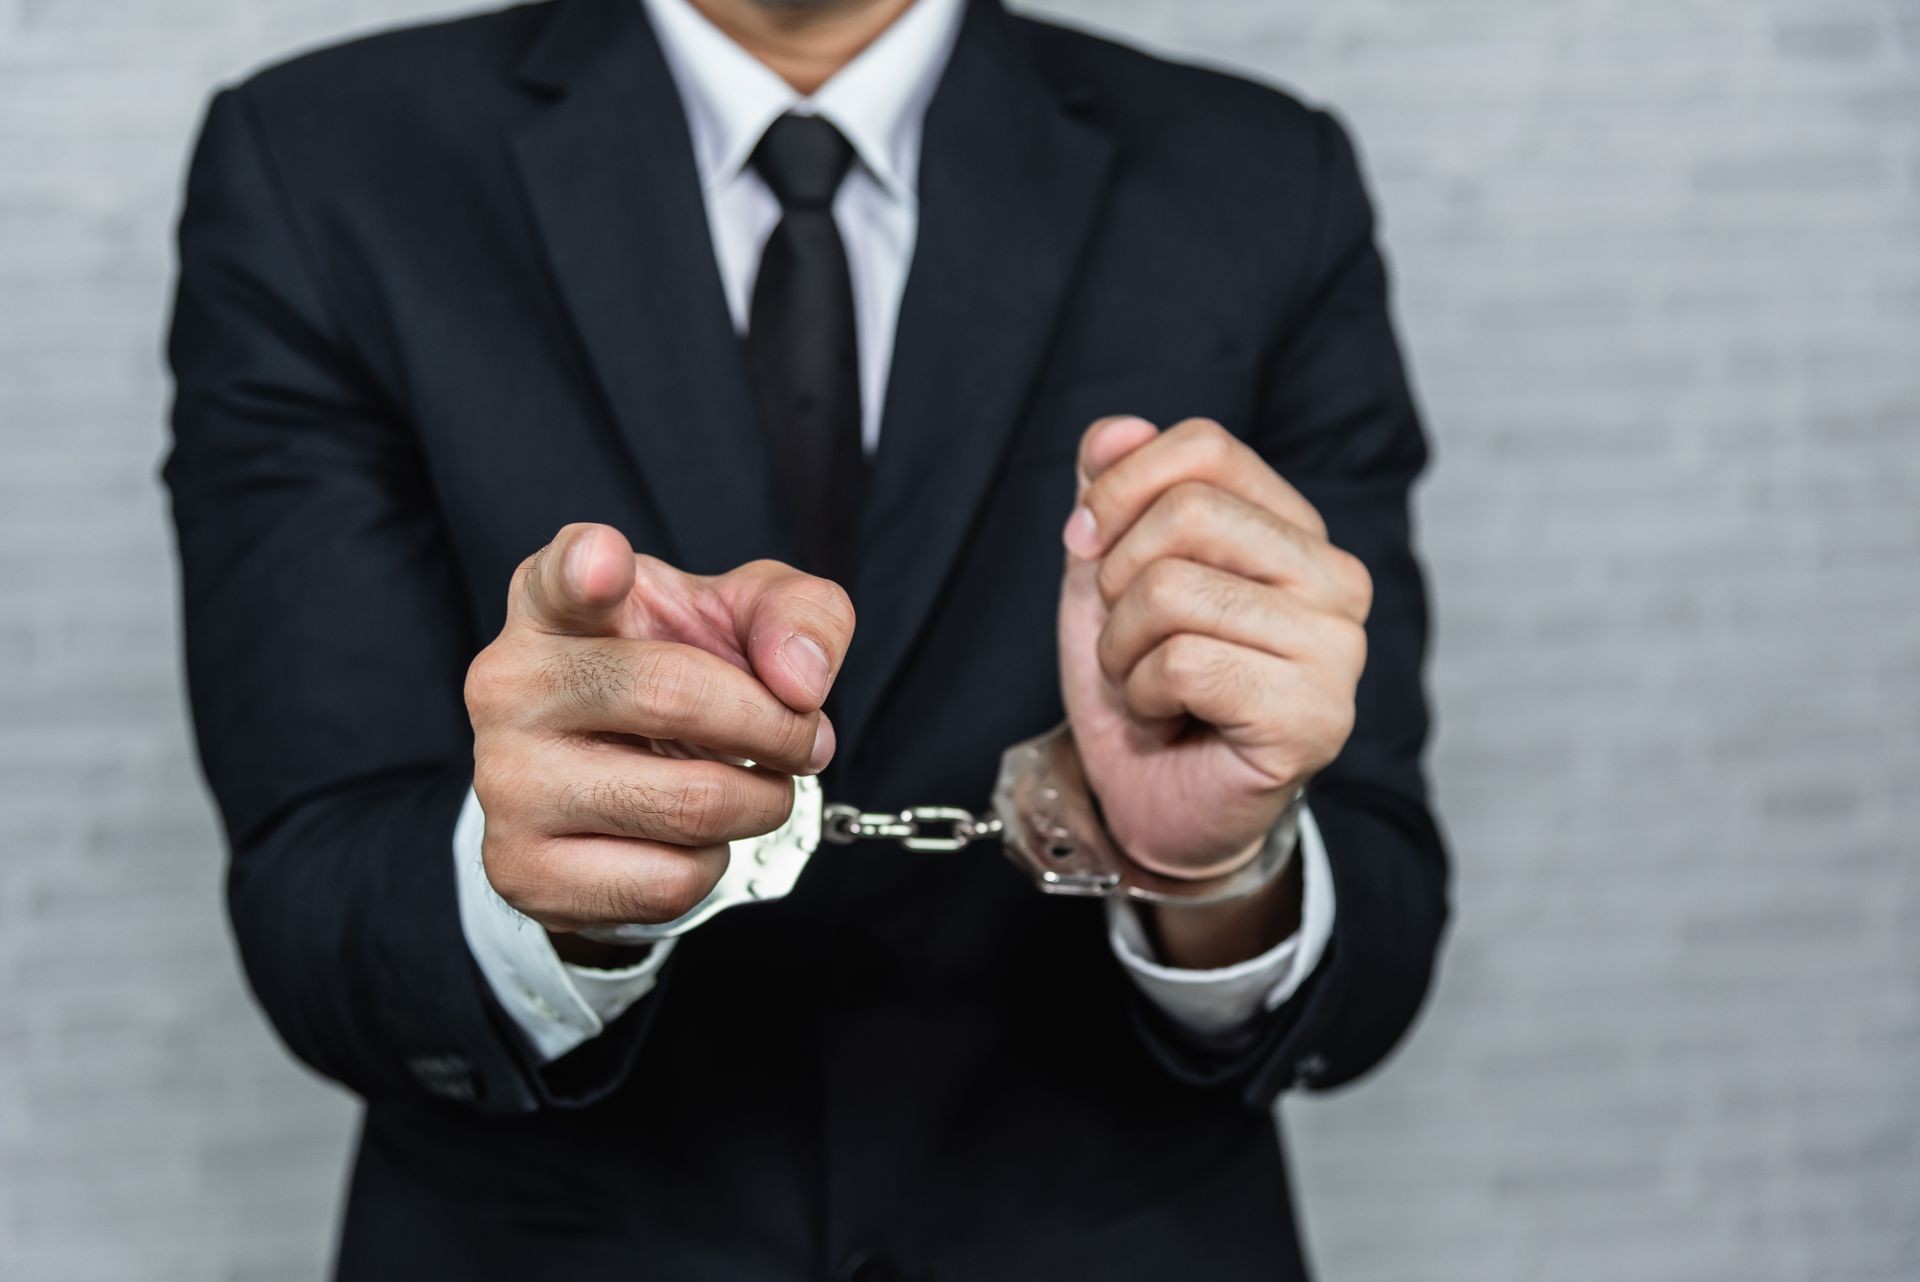 businessman in handcuffs arrested isolated on gray background